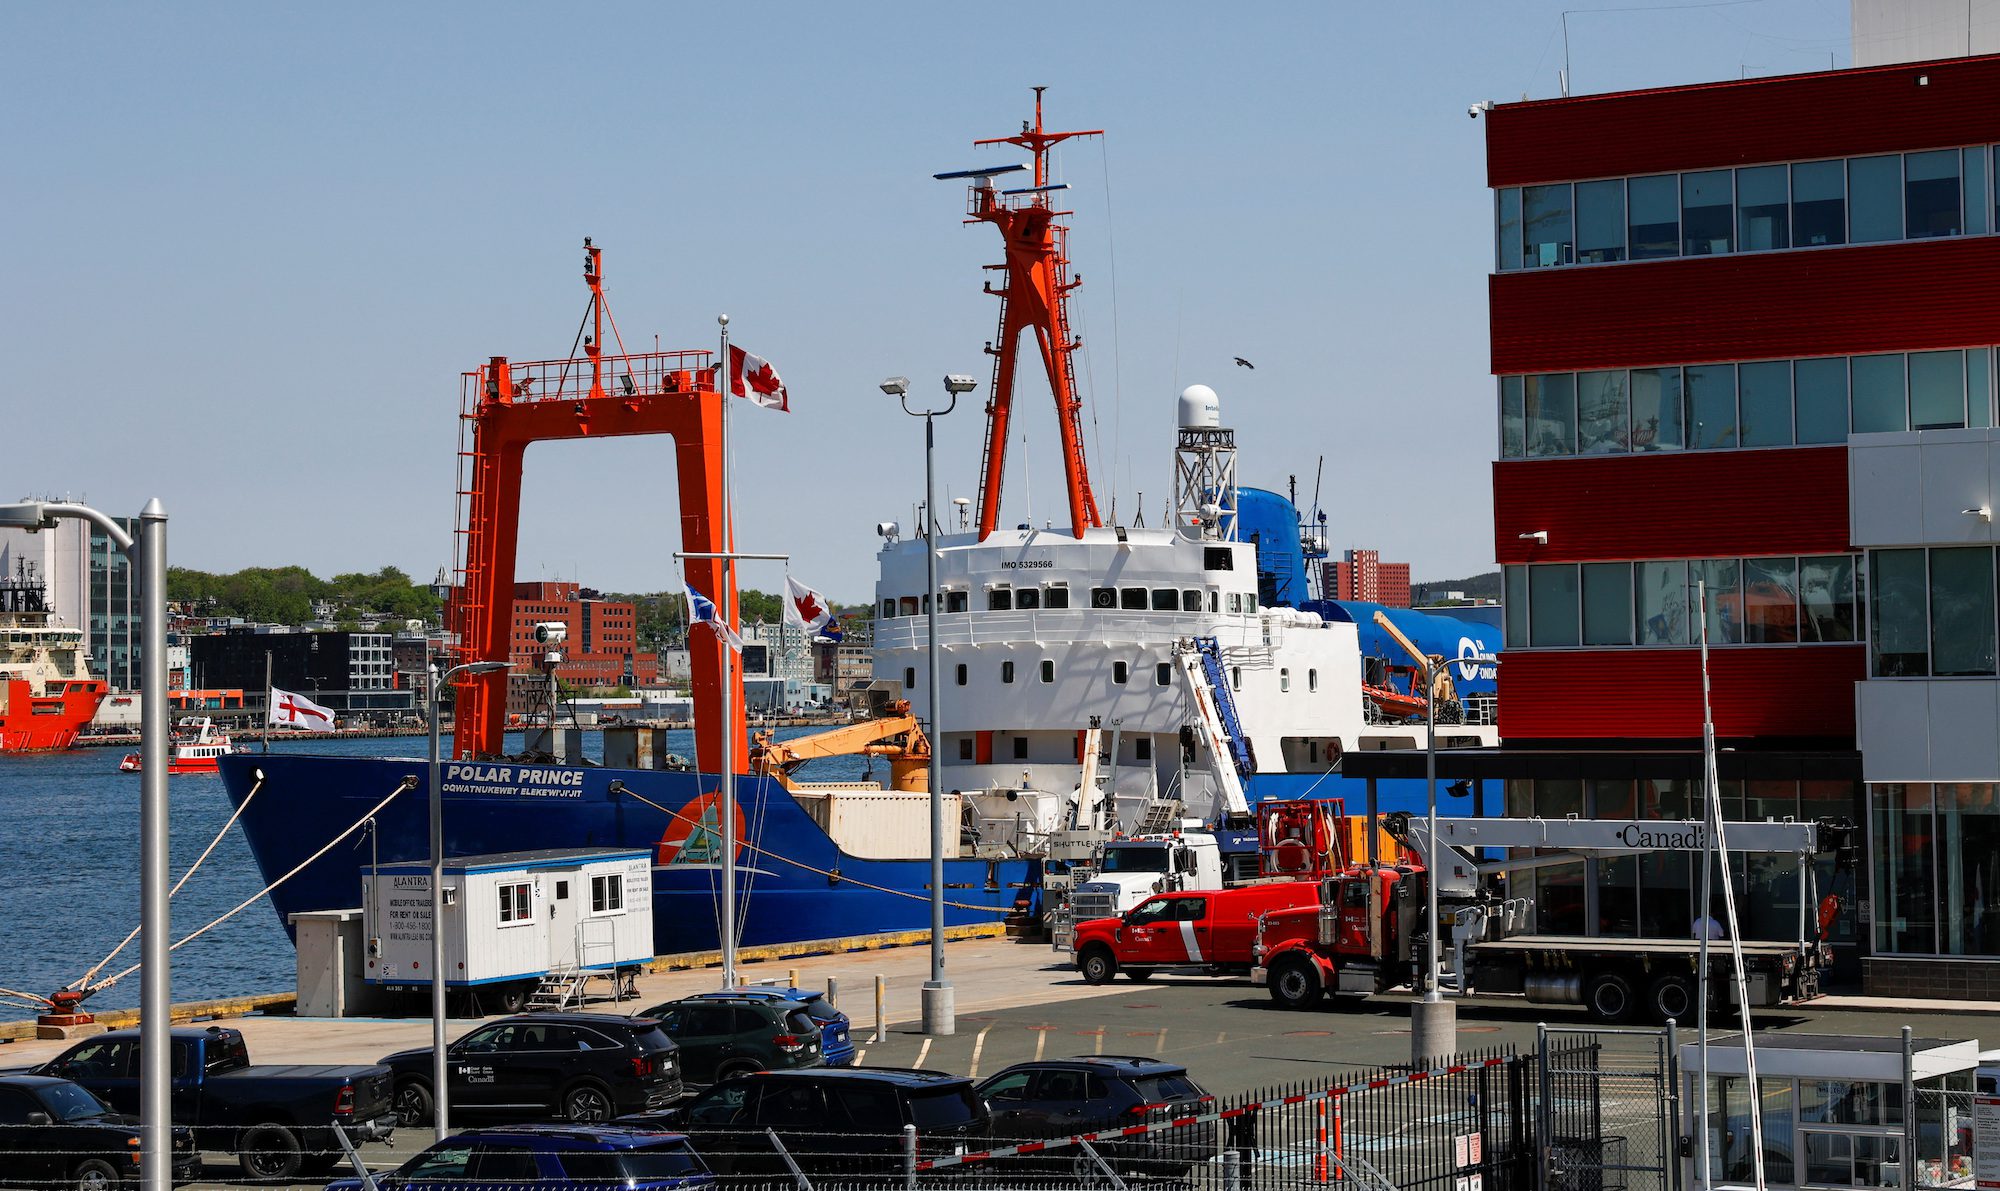 The Polar Prince expedition support vessel is docked at the port of St. John's, following the news of the vehicle's implosion, in Newfoundland, Canada.